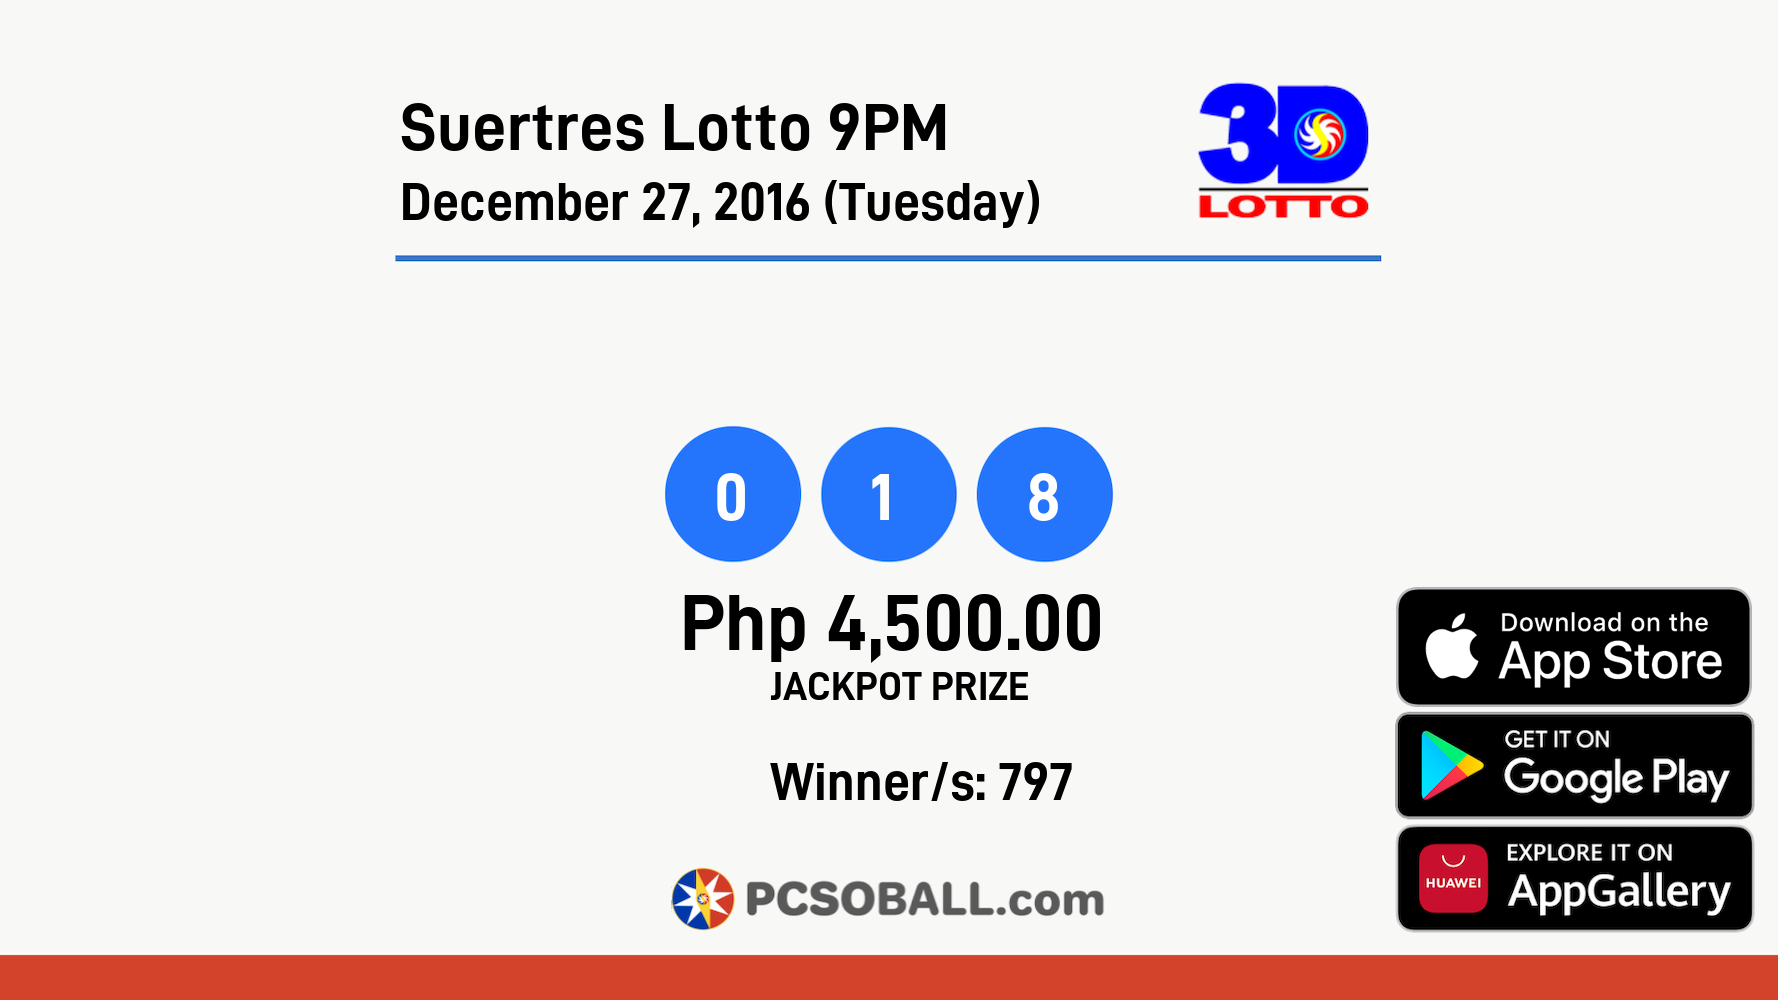 Suertres Lotto 9PM December 27, 2016 (Tuesday) Result